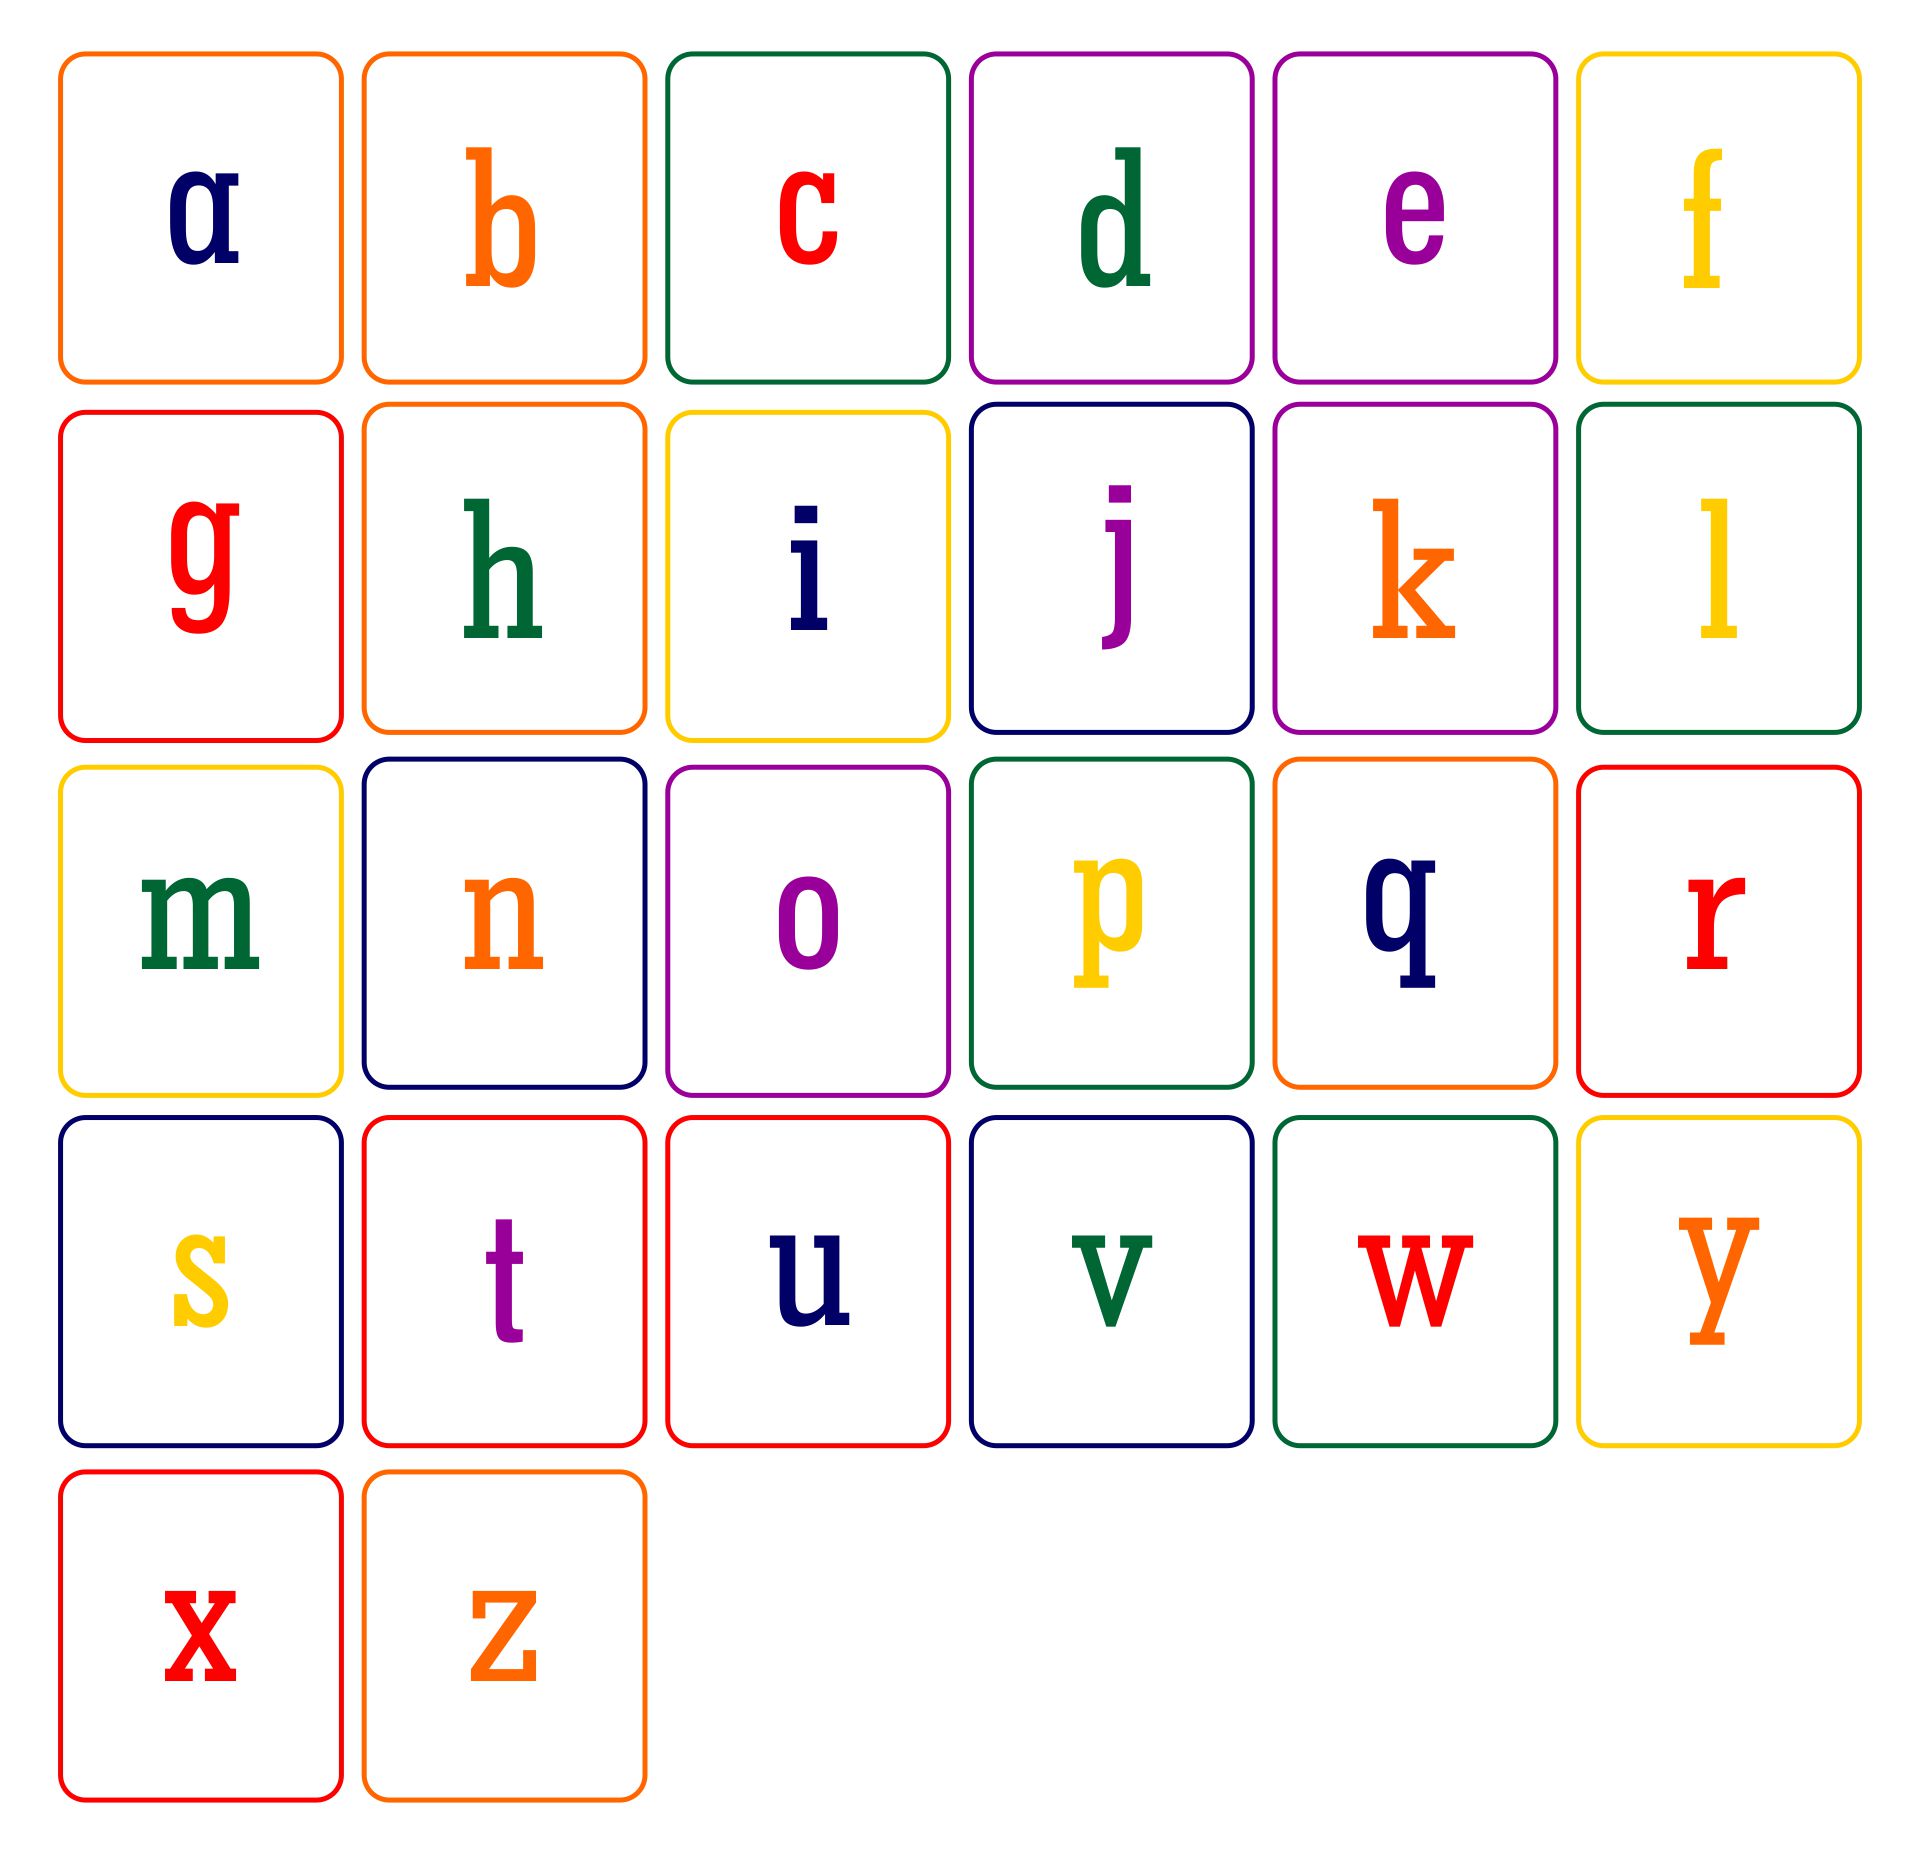 Lower Case Letters Flashcards Printable